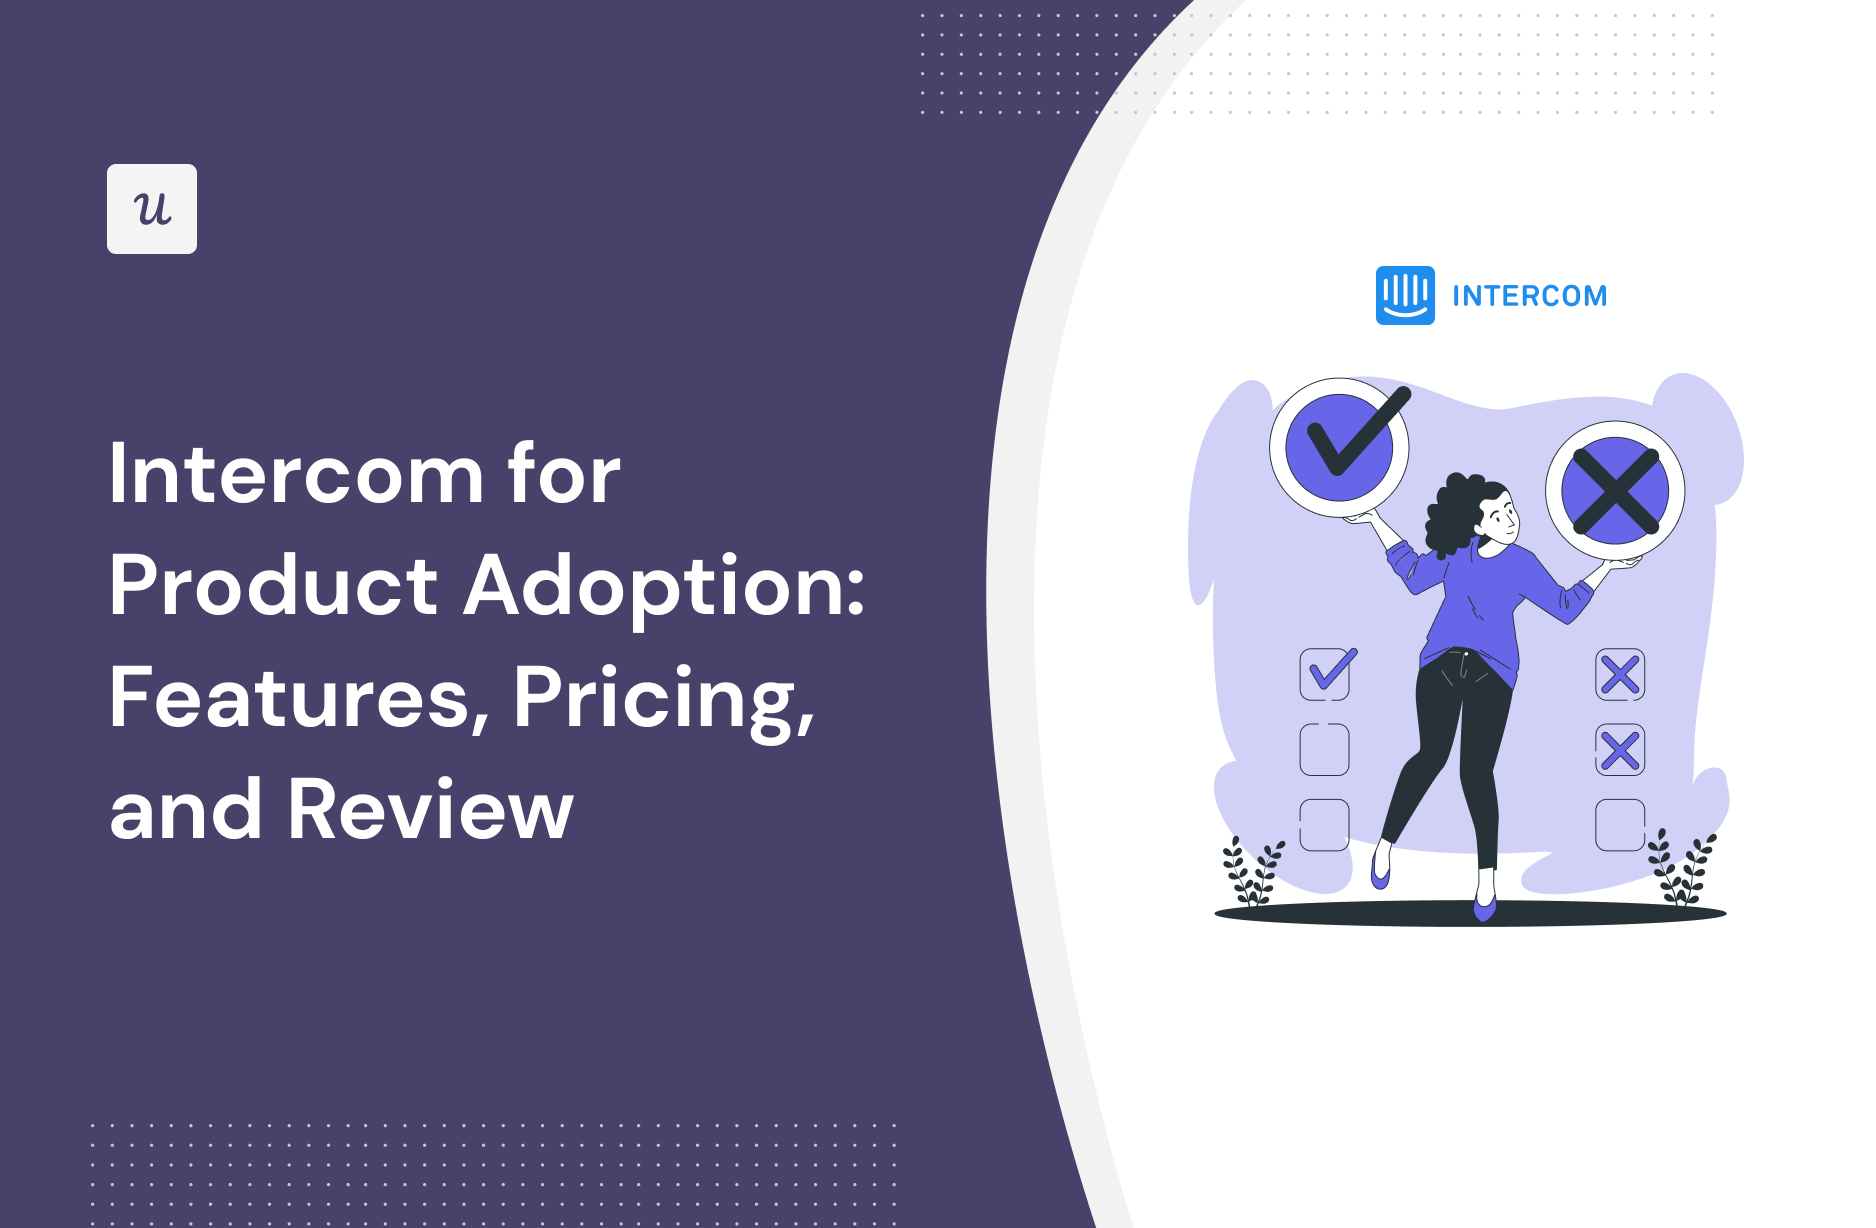 Intercom for Product adoption: Features, Pricing, and Review